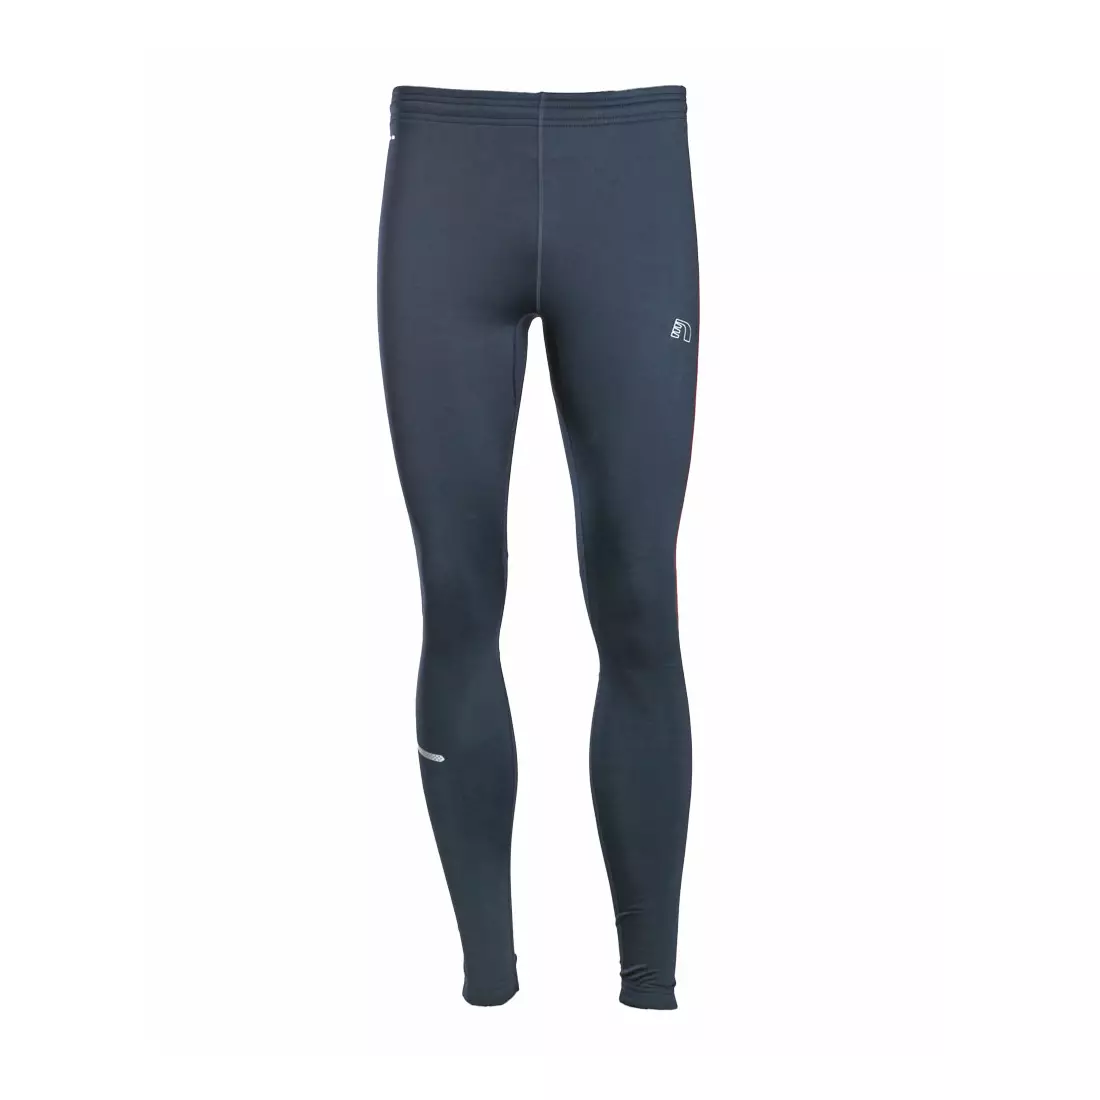 NEWLINE IMOTION WINTER TIGHTS 14101-110 - men's running pants, color: Navy blue